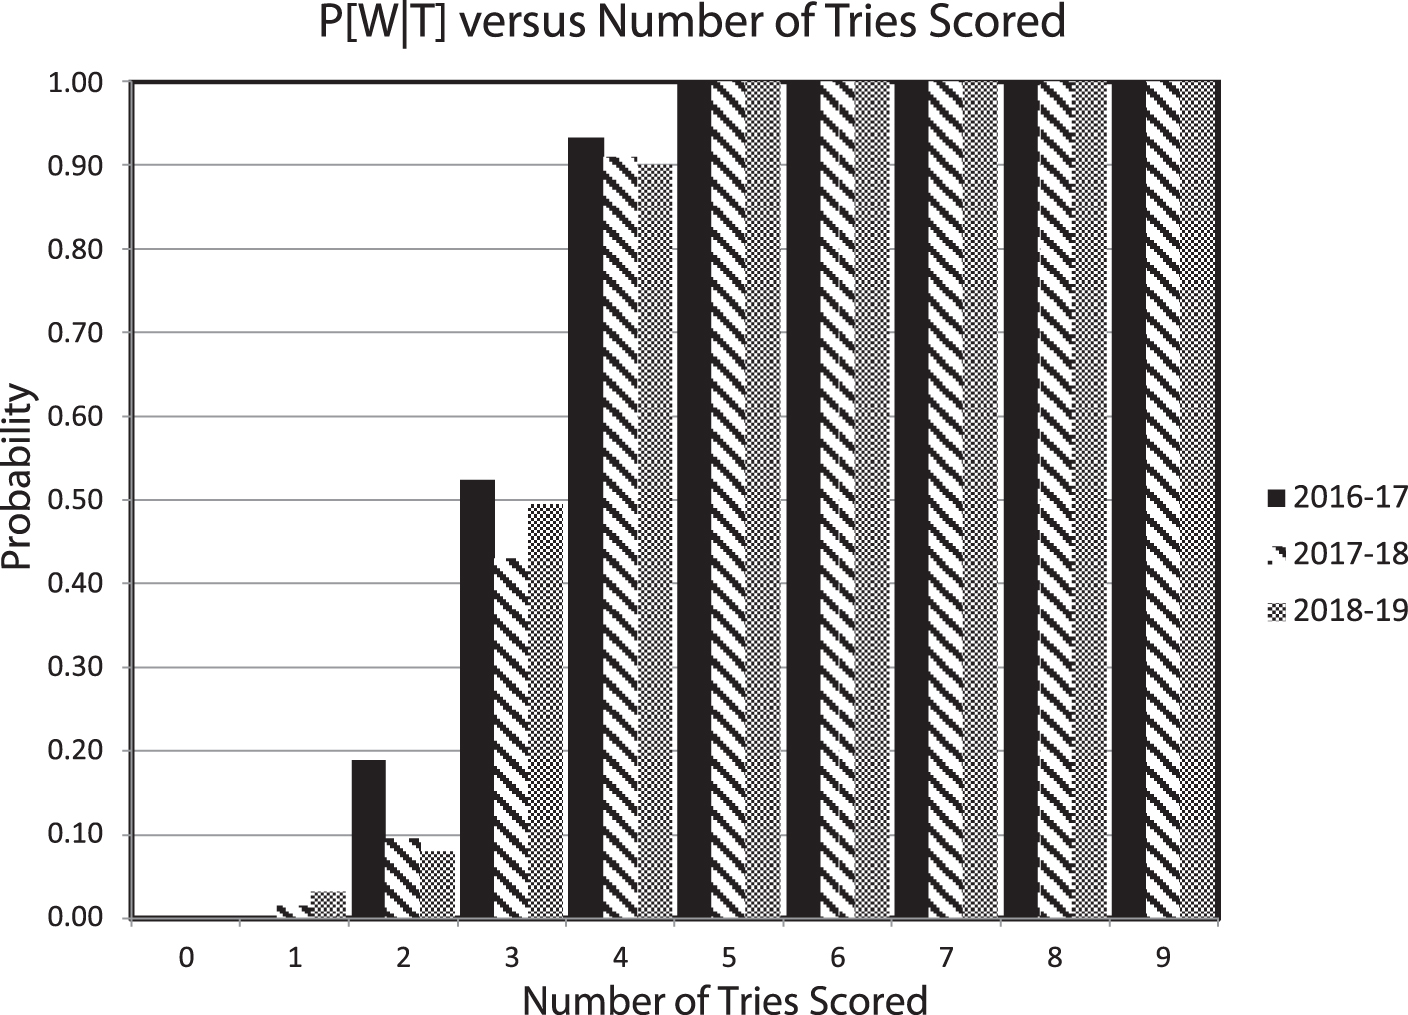 The probability of winning given that a team scores T tries (P[W|T]) for three competitions. Teams that scored one try or did not score a try had essentially no chance of winning. The 50–50 point for winning was about 3 tries, and teams scoring five or more tries were certain to win in these competitions.